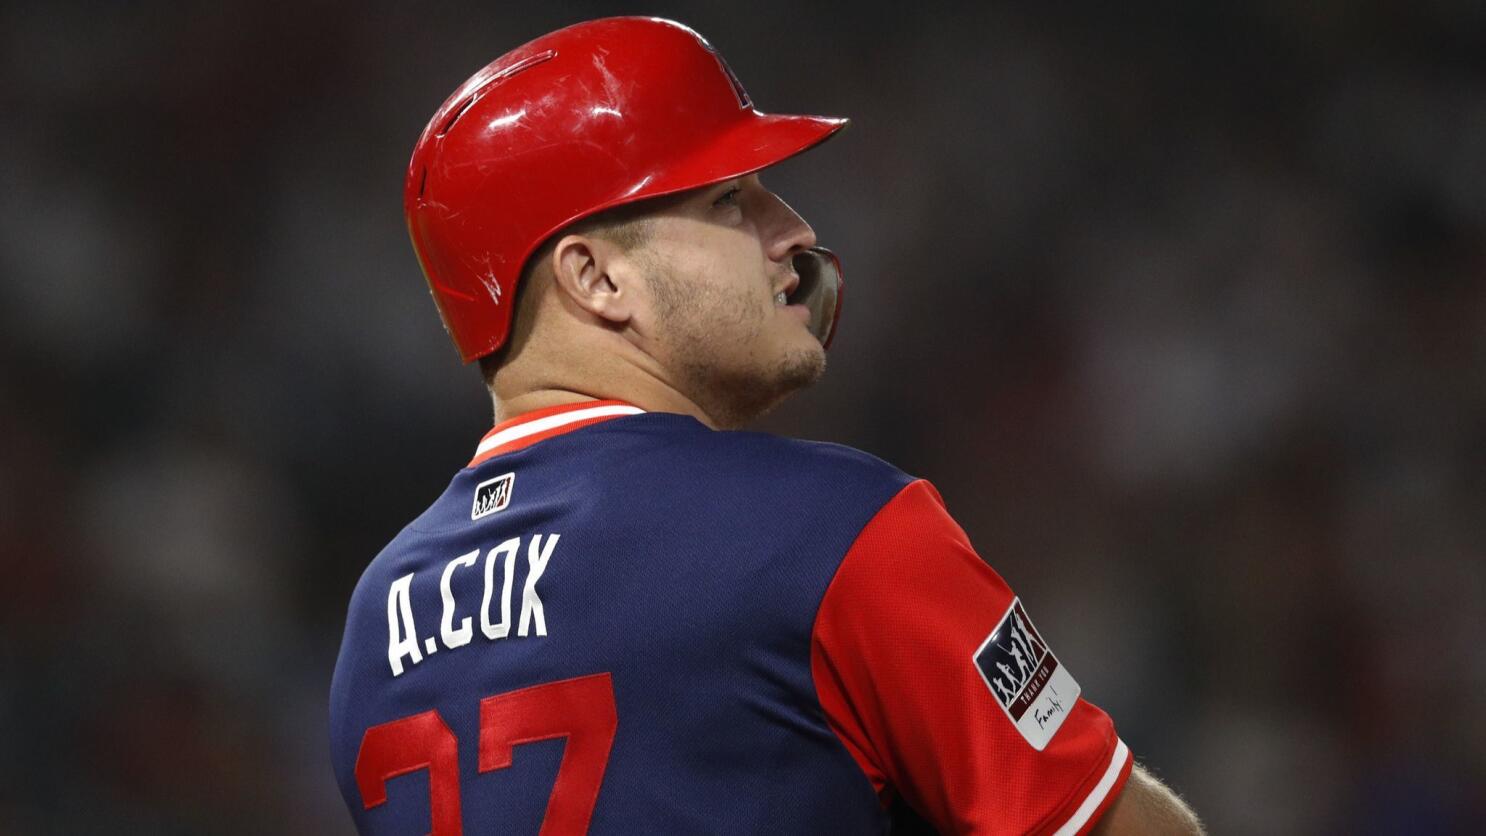 Angels' Mike Trout honors late brother-in-law with name on jersey